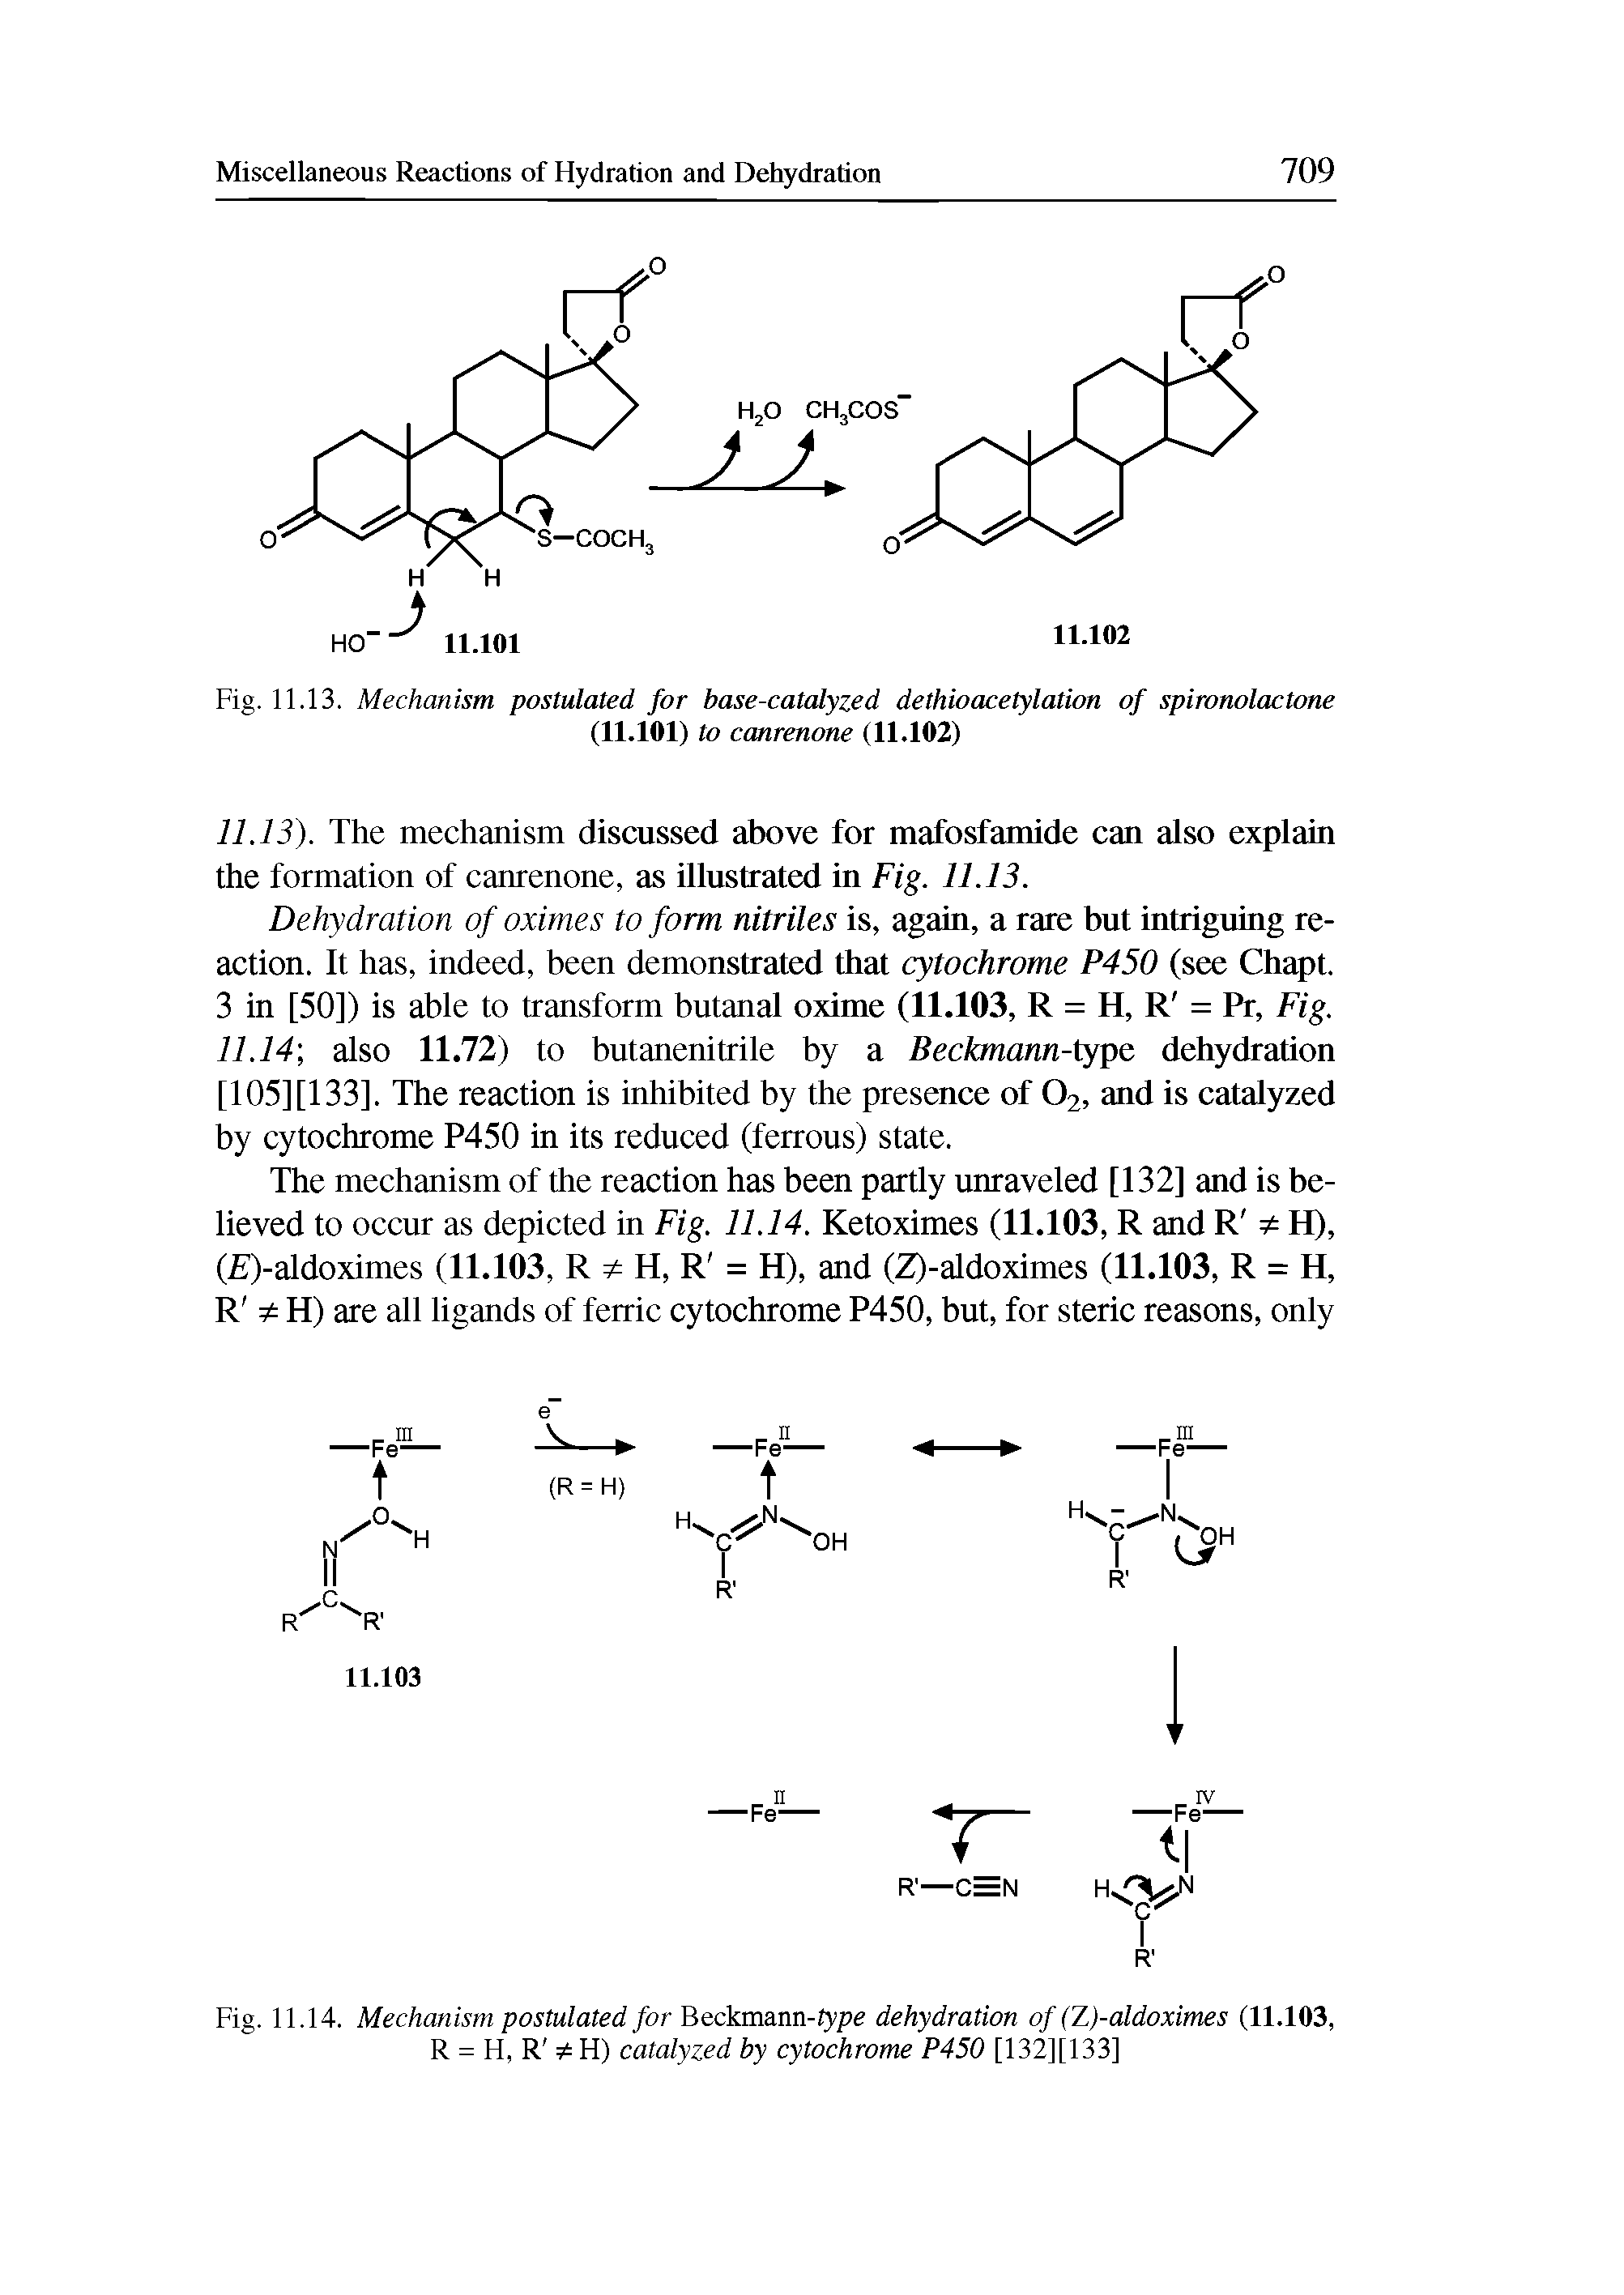 Fig. 11.14. Mechanism postulated for Beckmann-fype dehydration of (Z)-aldoximes (11.103, R = H, R H) catalyzed by cytochrome P450 [132][133]...